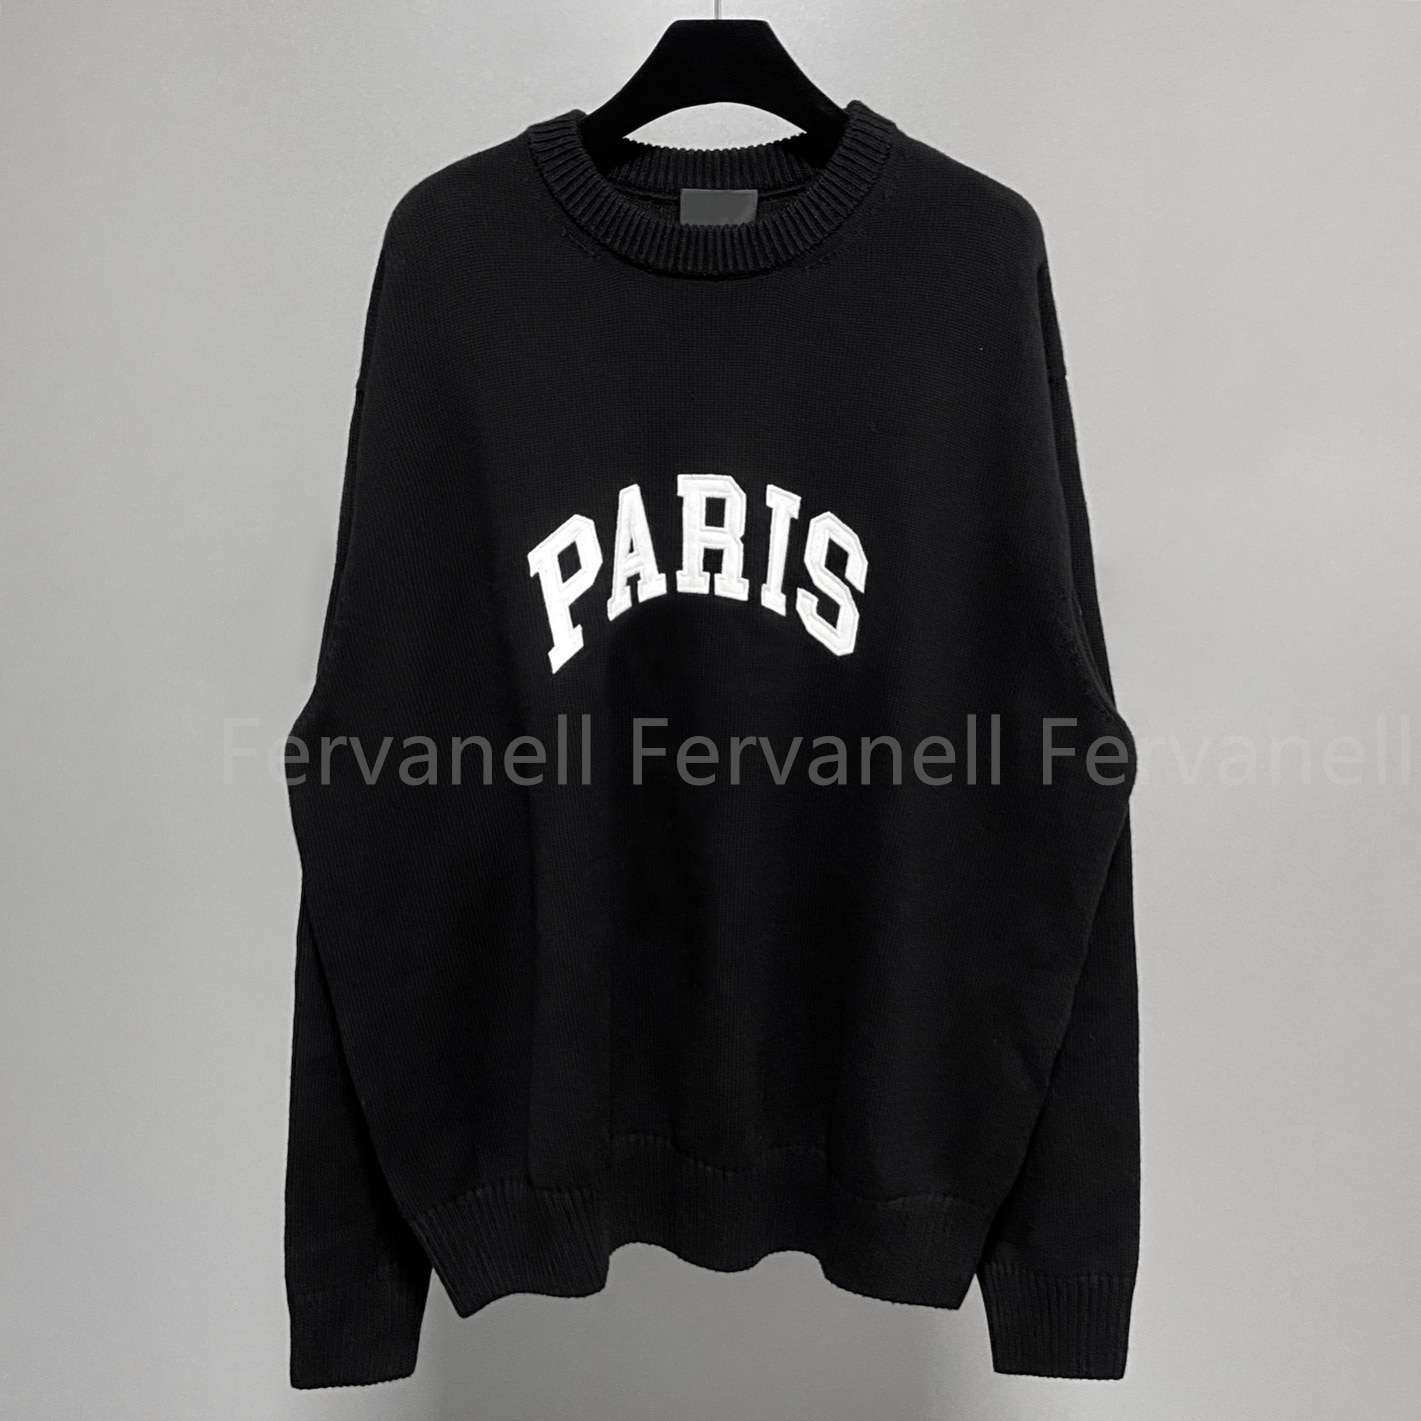 Oversize Sweater for Men Women&s Fashion Embroidered New Style O-neck Long Sleeve Autumn Winter Casual Clothing Quality Sweater